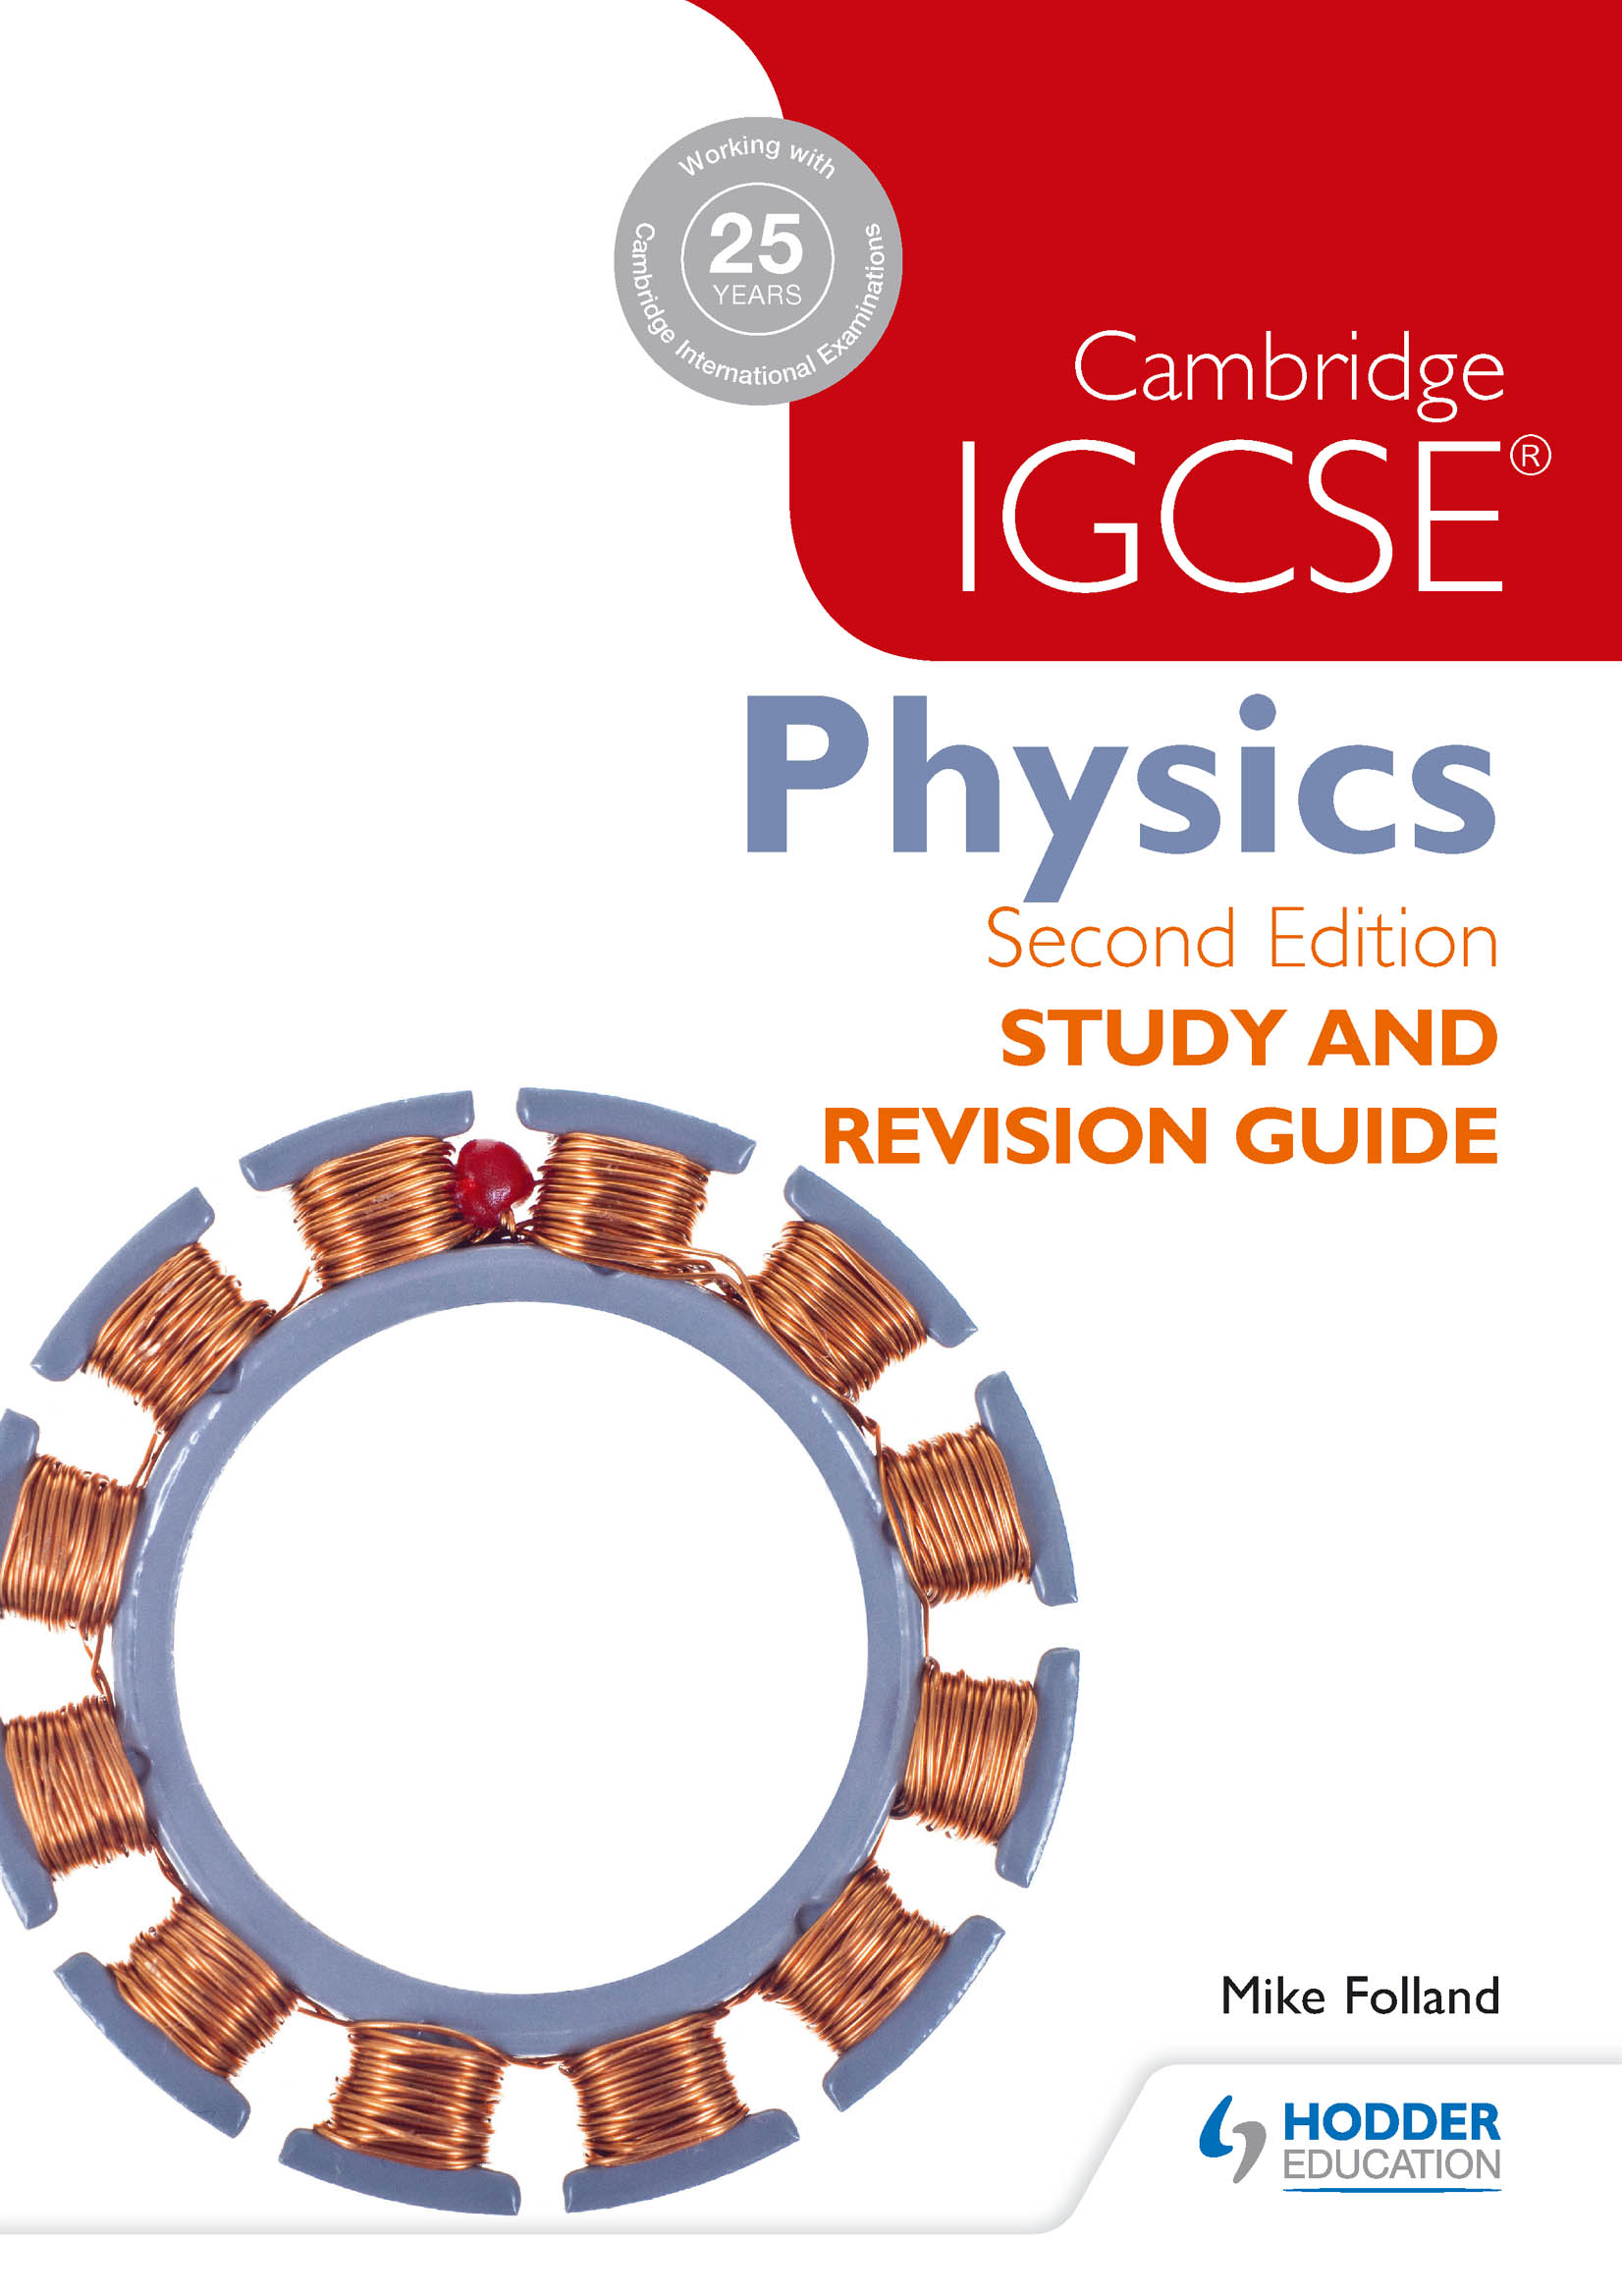 Cambridge IGCSE Physics Study and Revision Guide 2nd edition